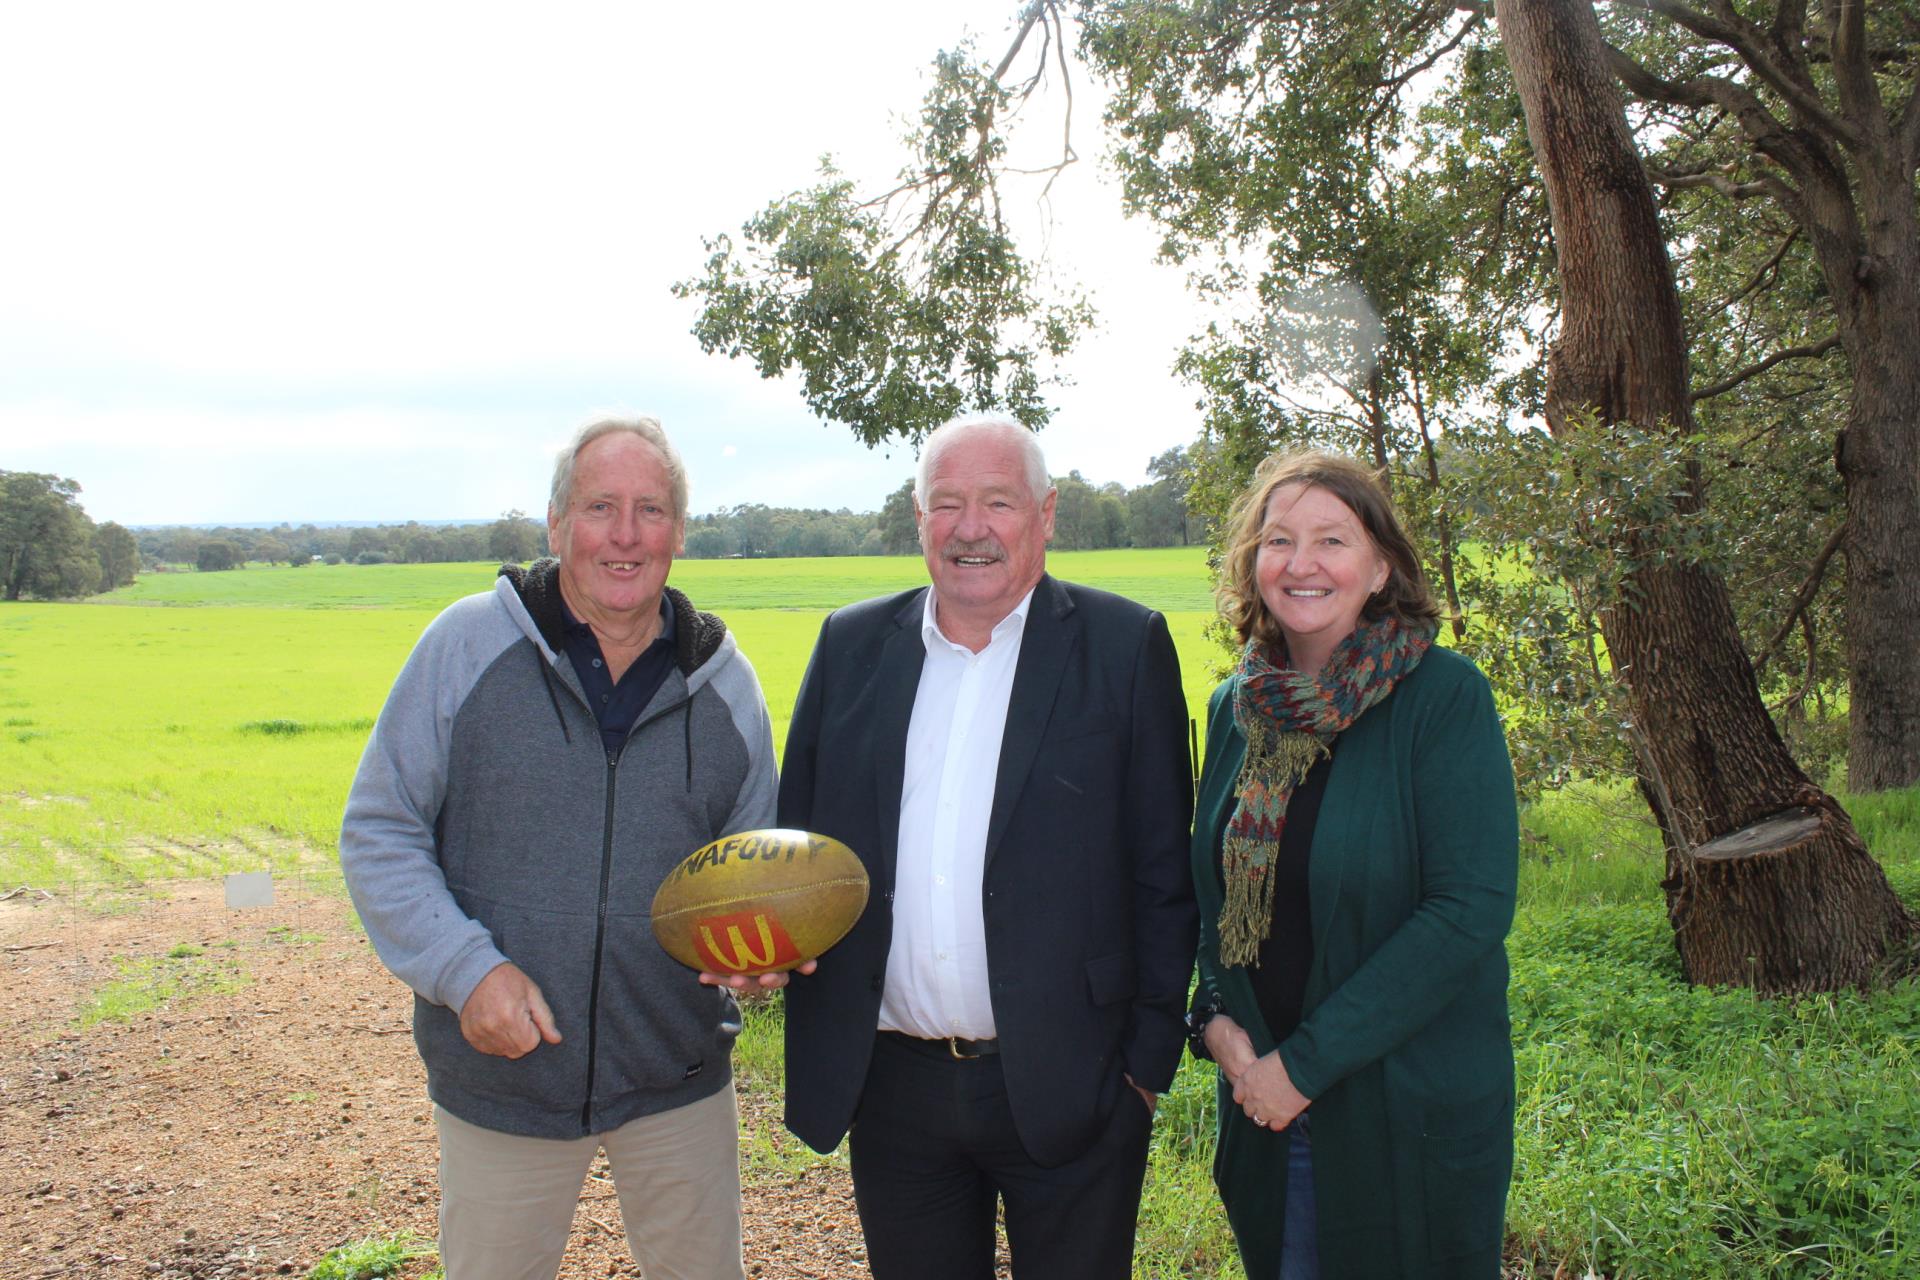 Shire Deputy President Dave Atwell, Sport and Recreation Minister Mick Murray and Shire President Michelle Rich at the Keirnan Park Recreation Precinct site.